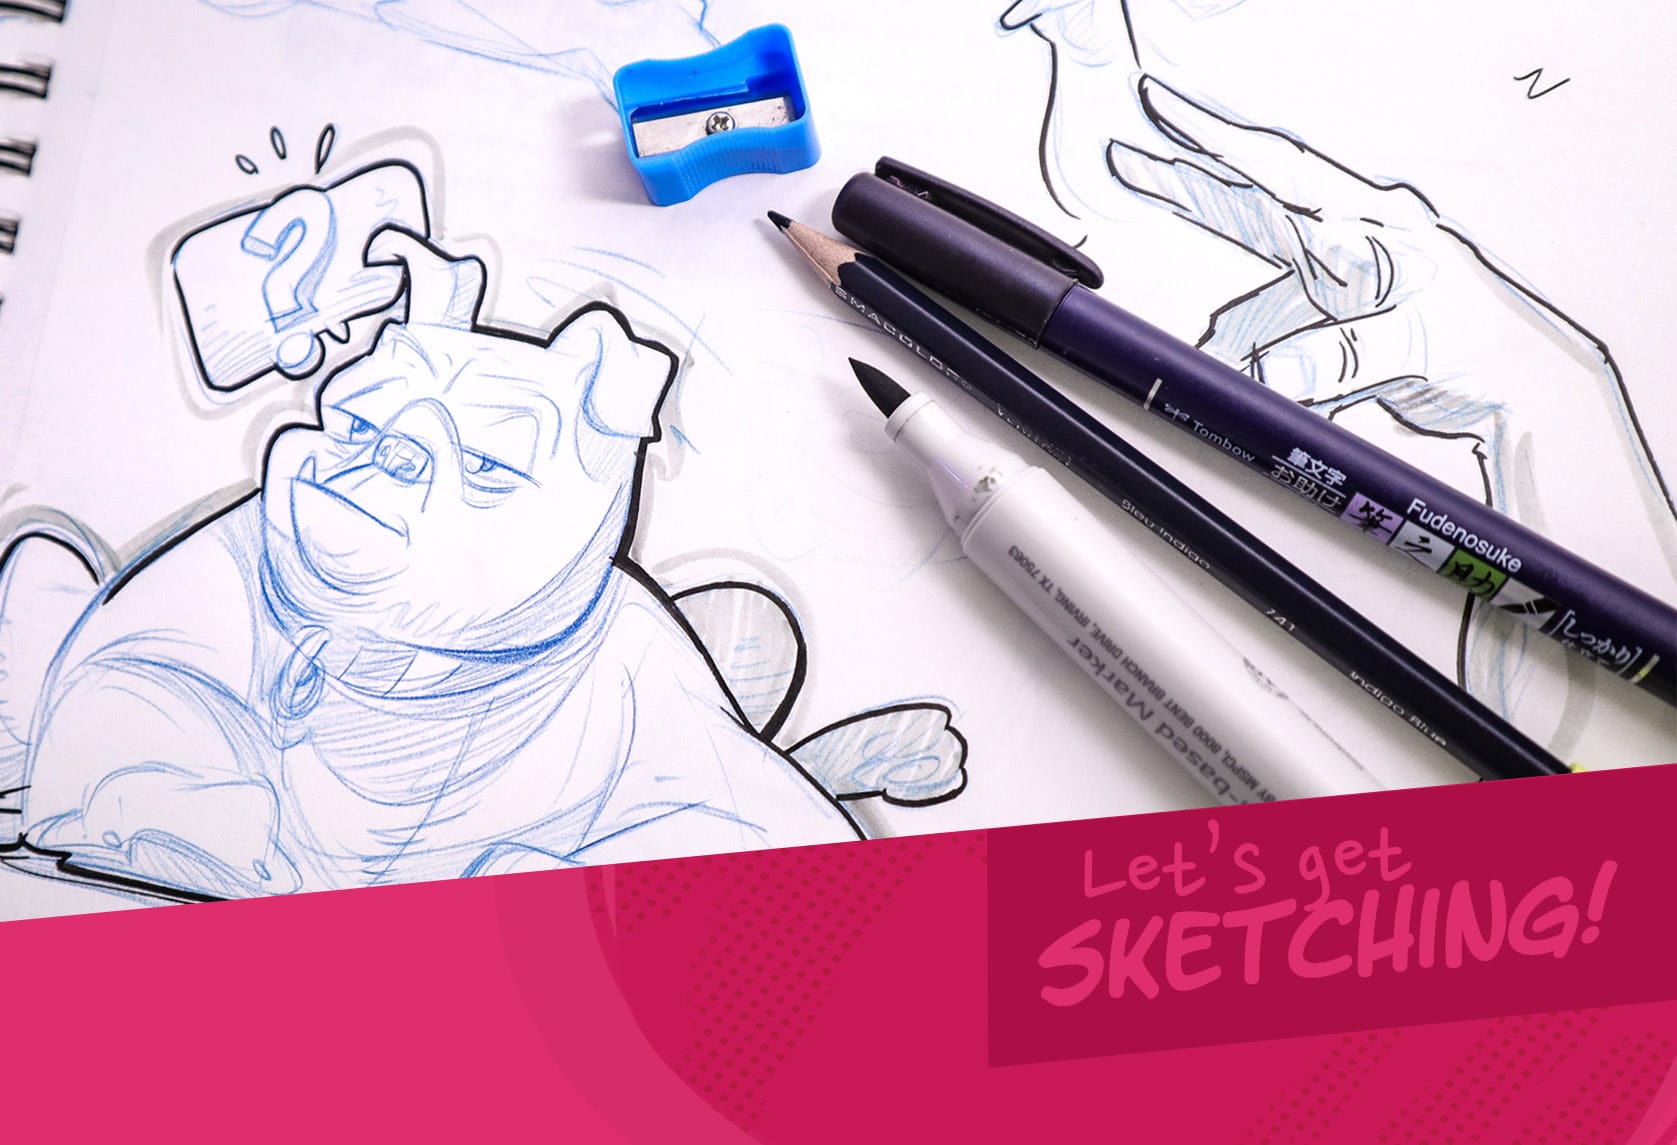 Creative Tips for Sketching and More